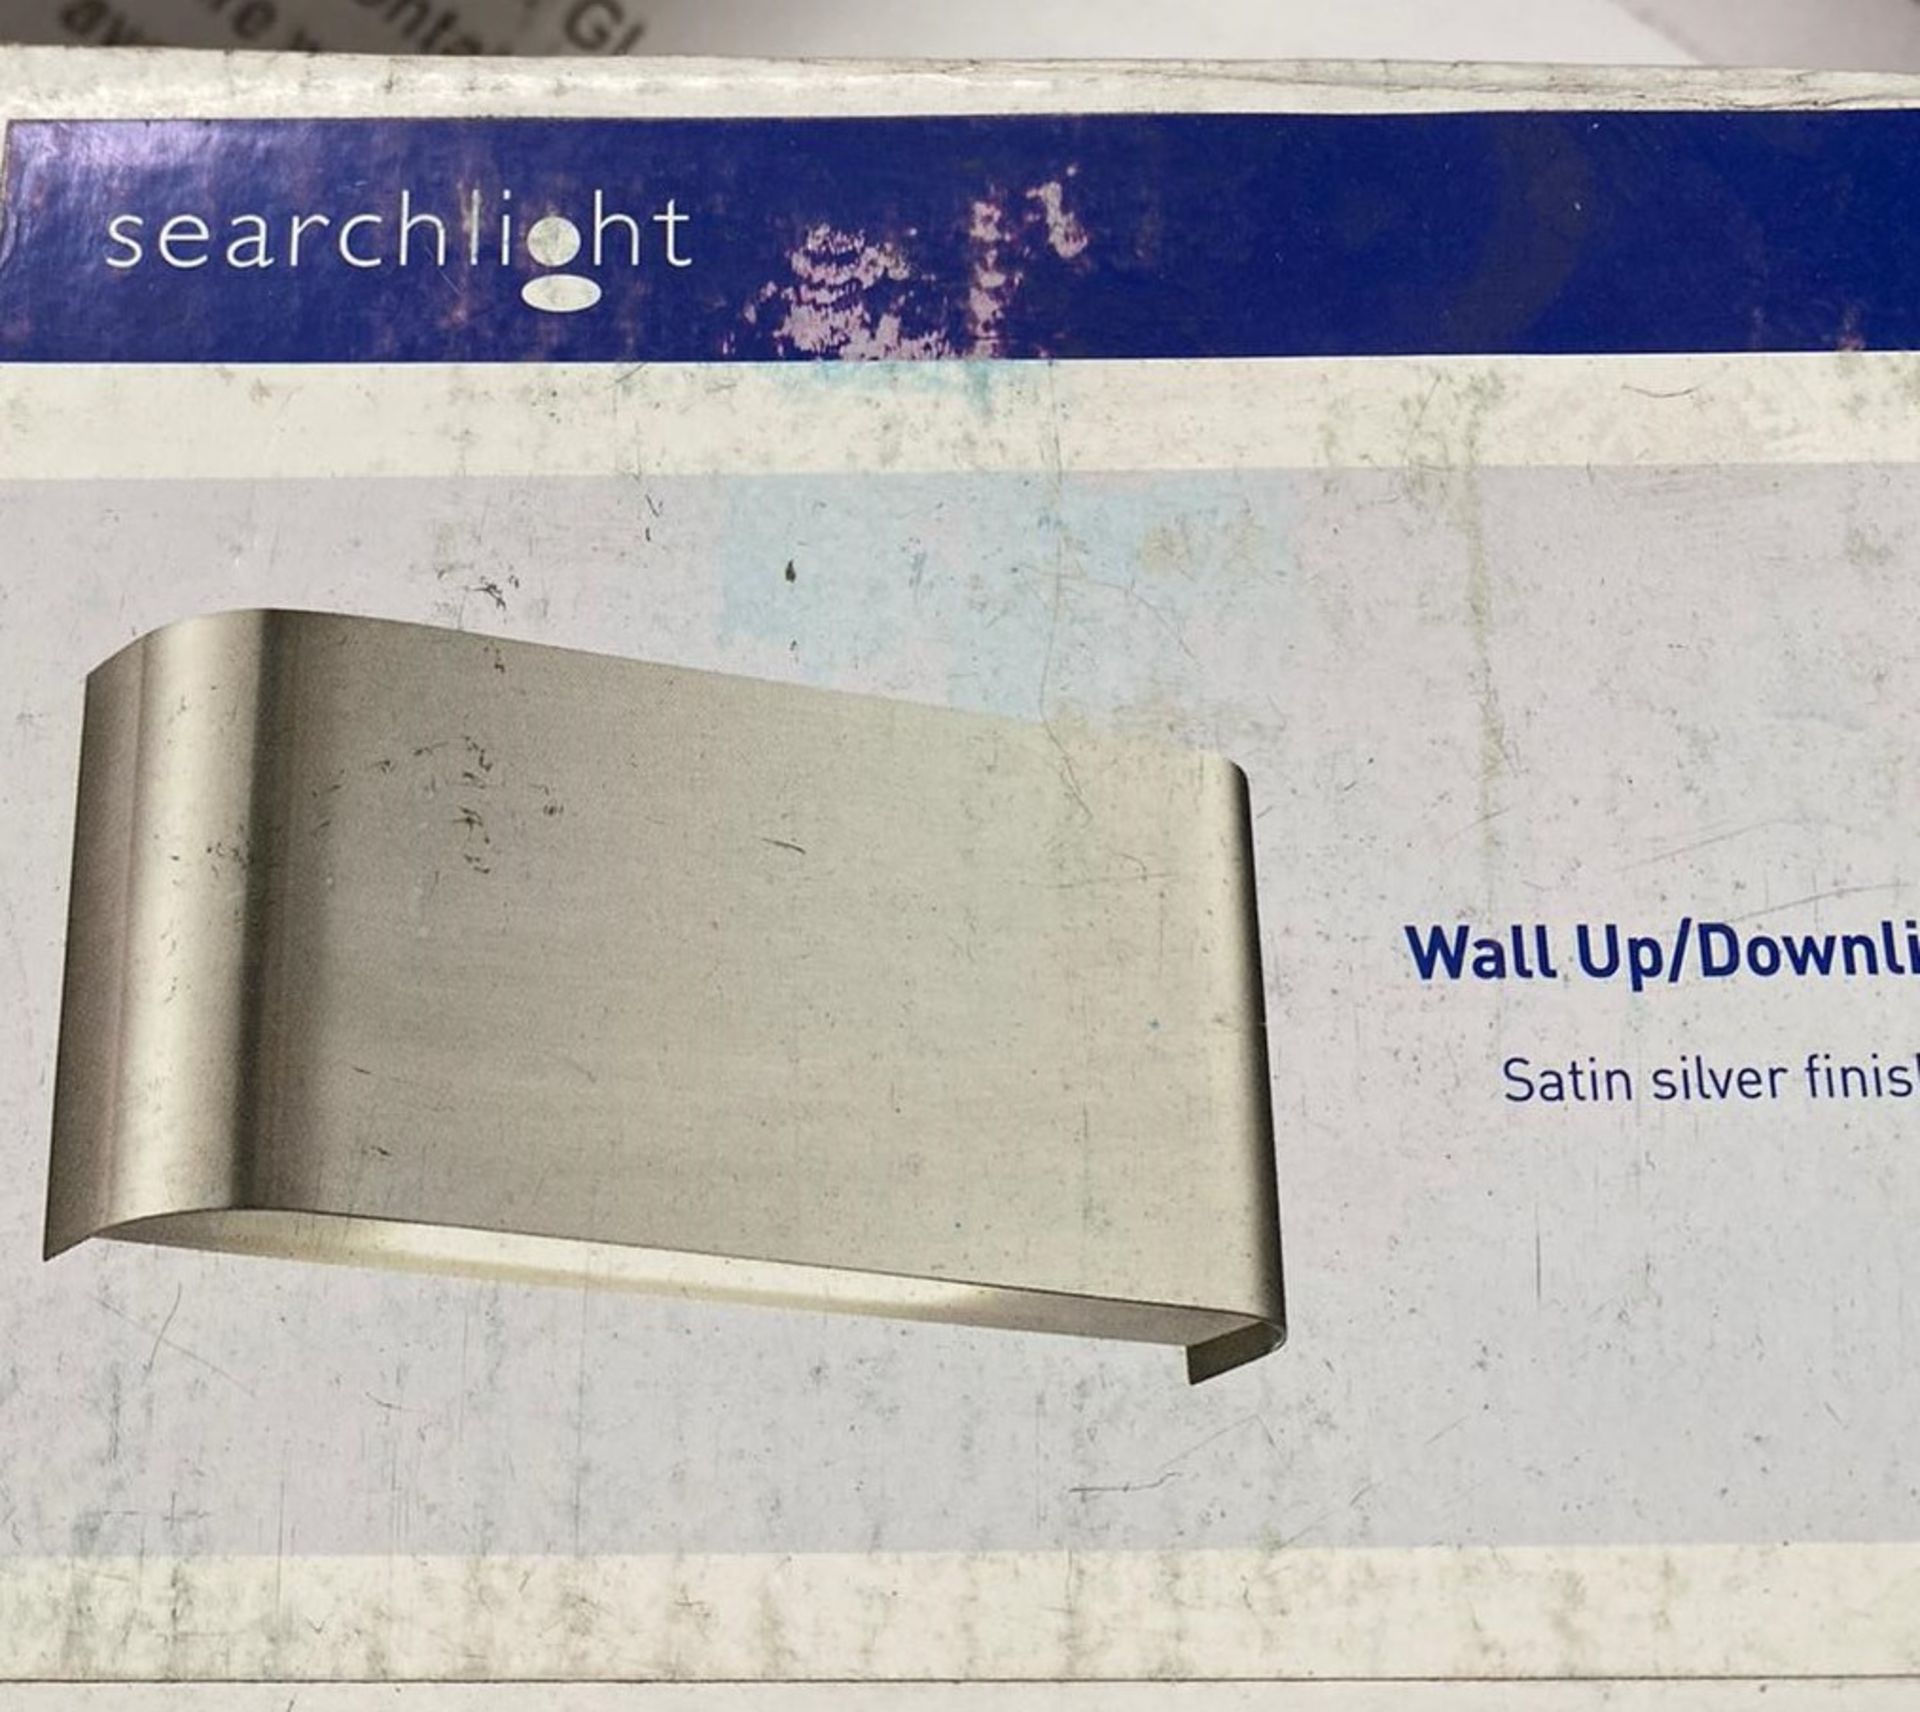 1 x Searchlight Wall Up/downlight in a satin silver - Ref: 1953SS - New Boxed - RRP: £105.00(each) - Image 4 of 4